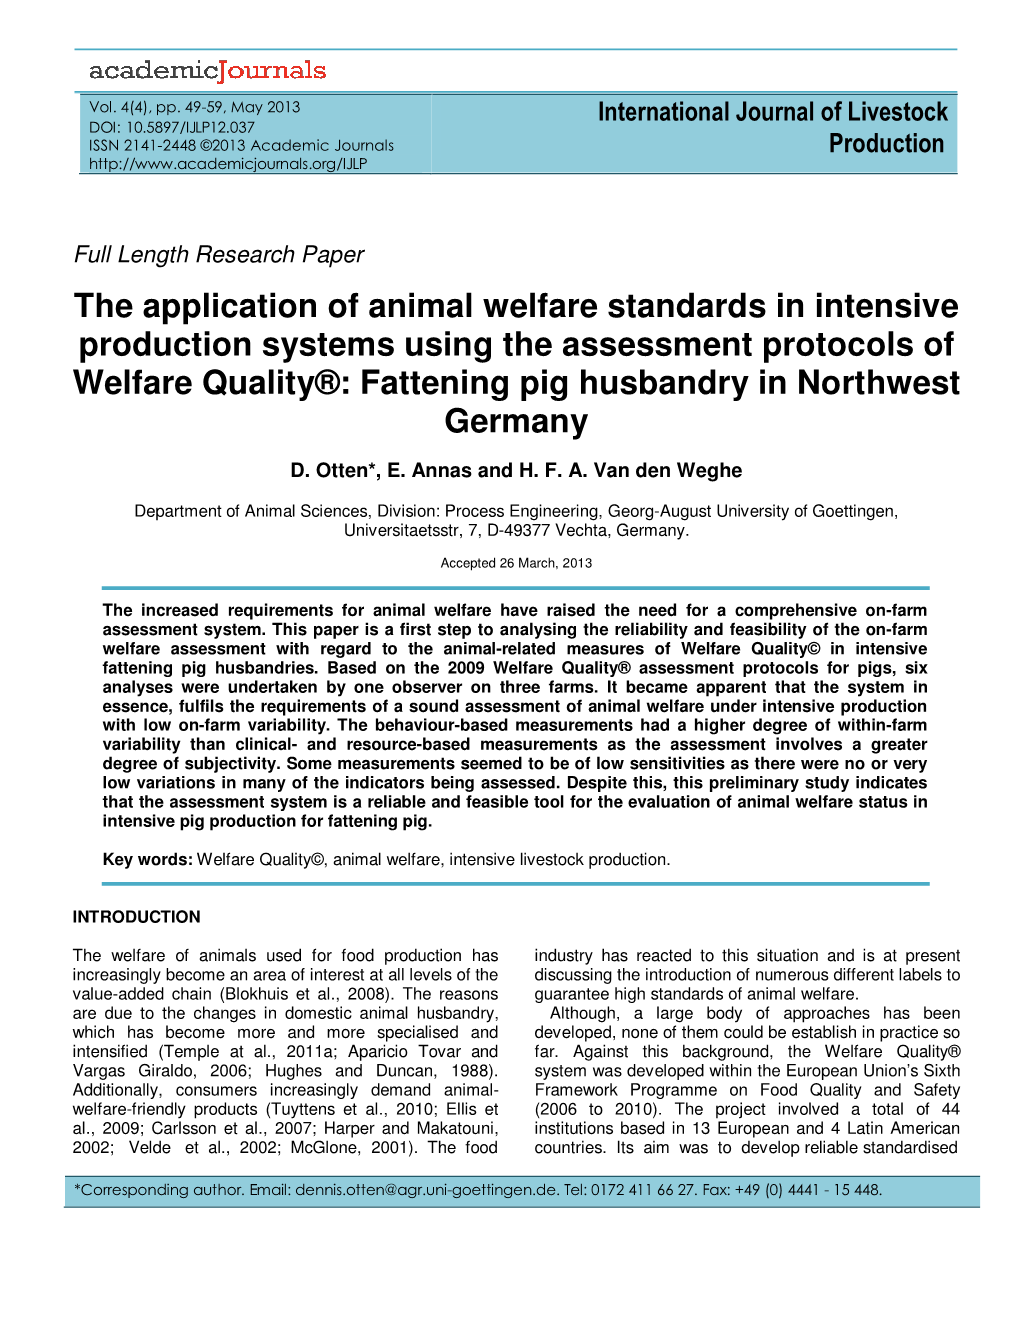 The Application of Animal Welfare Standards in Intensive Production Systems Using the Assessment Protocols of Welfare Quality®